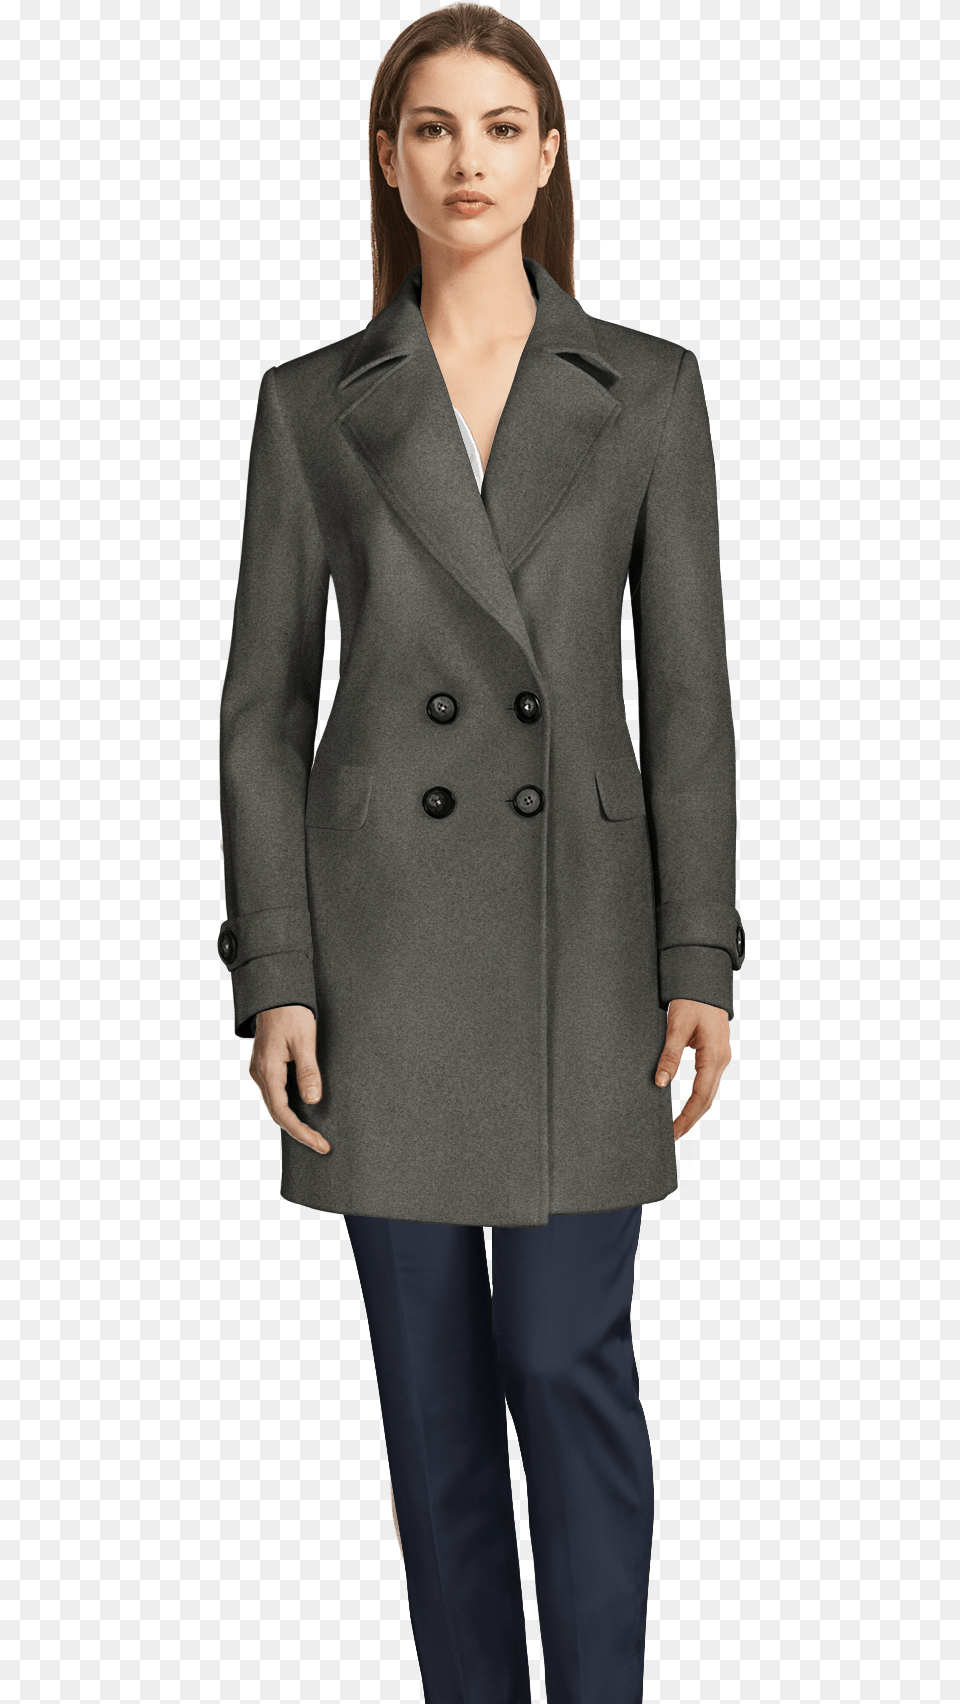 Long Light Grey Wool Trench Coat With Wide Lapels Tartan Funnel Neck Coat, Clothing, Overcoat, Jacket, Adult Png Image